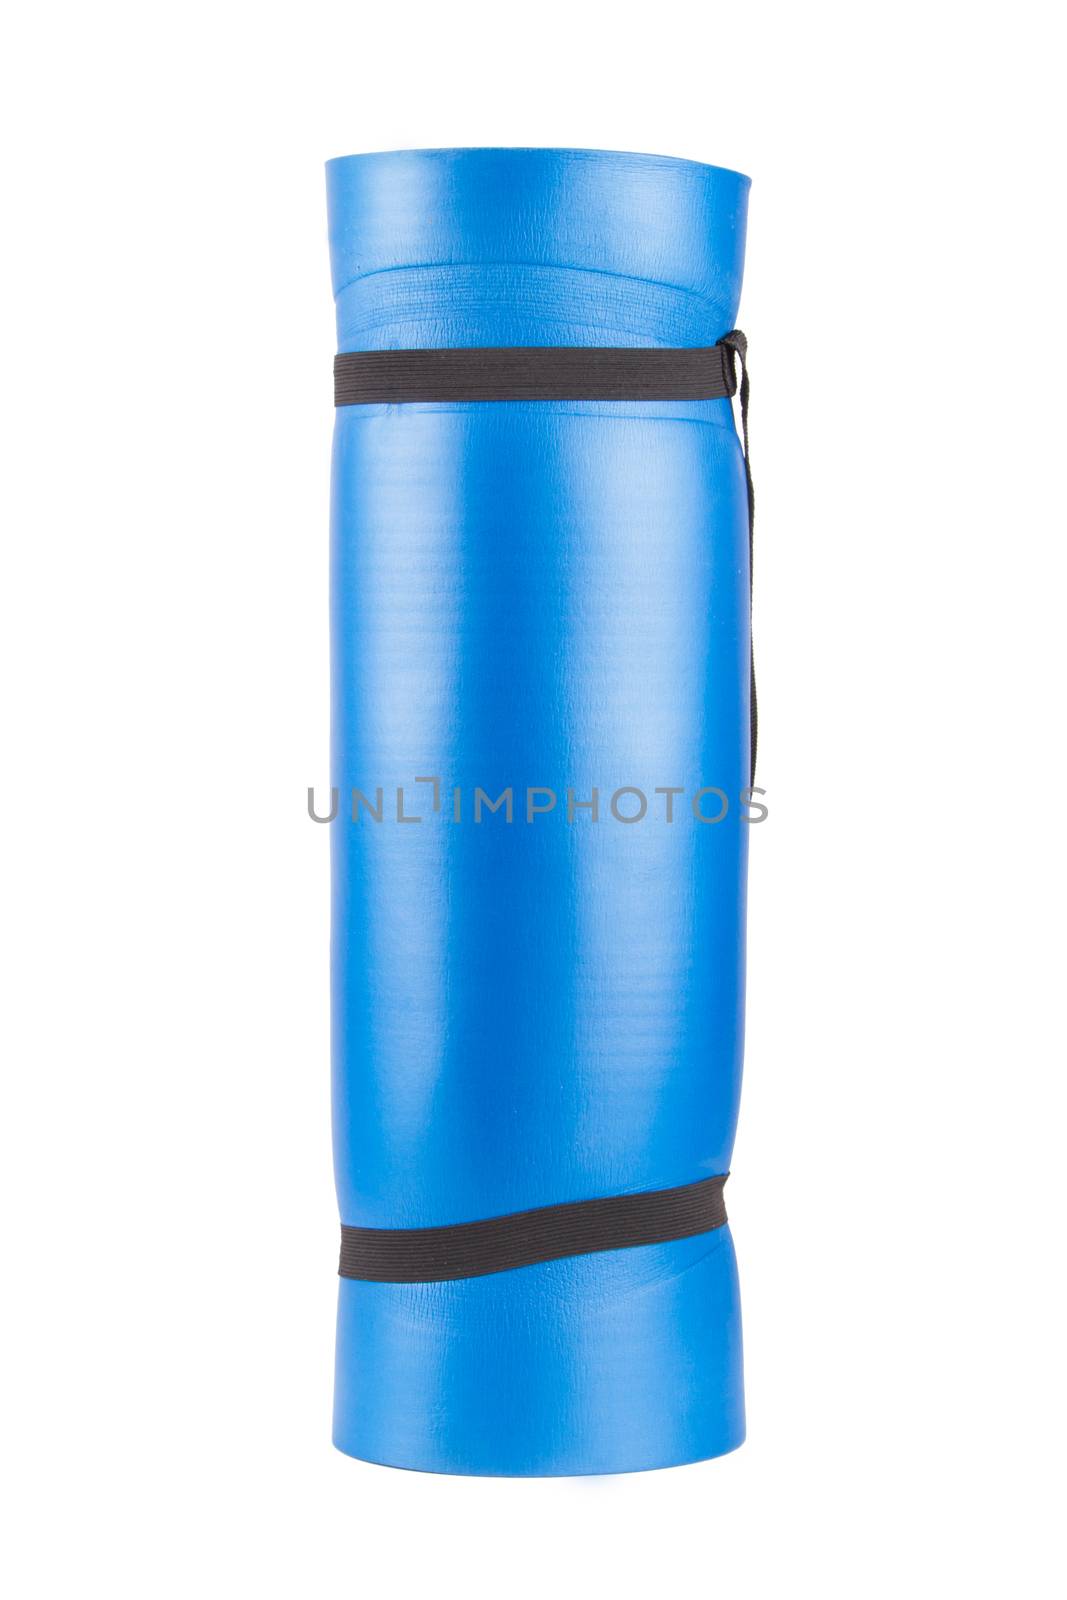 Blue standing yoga mat, isolated on white background.